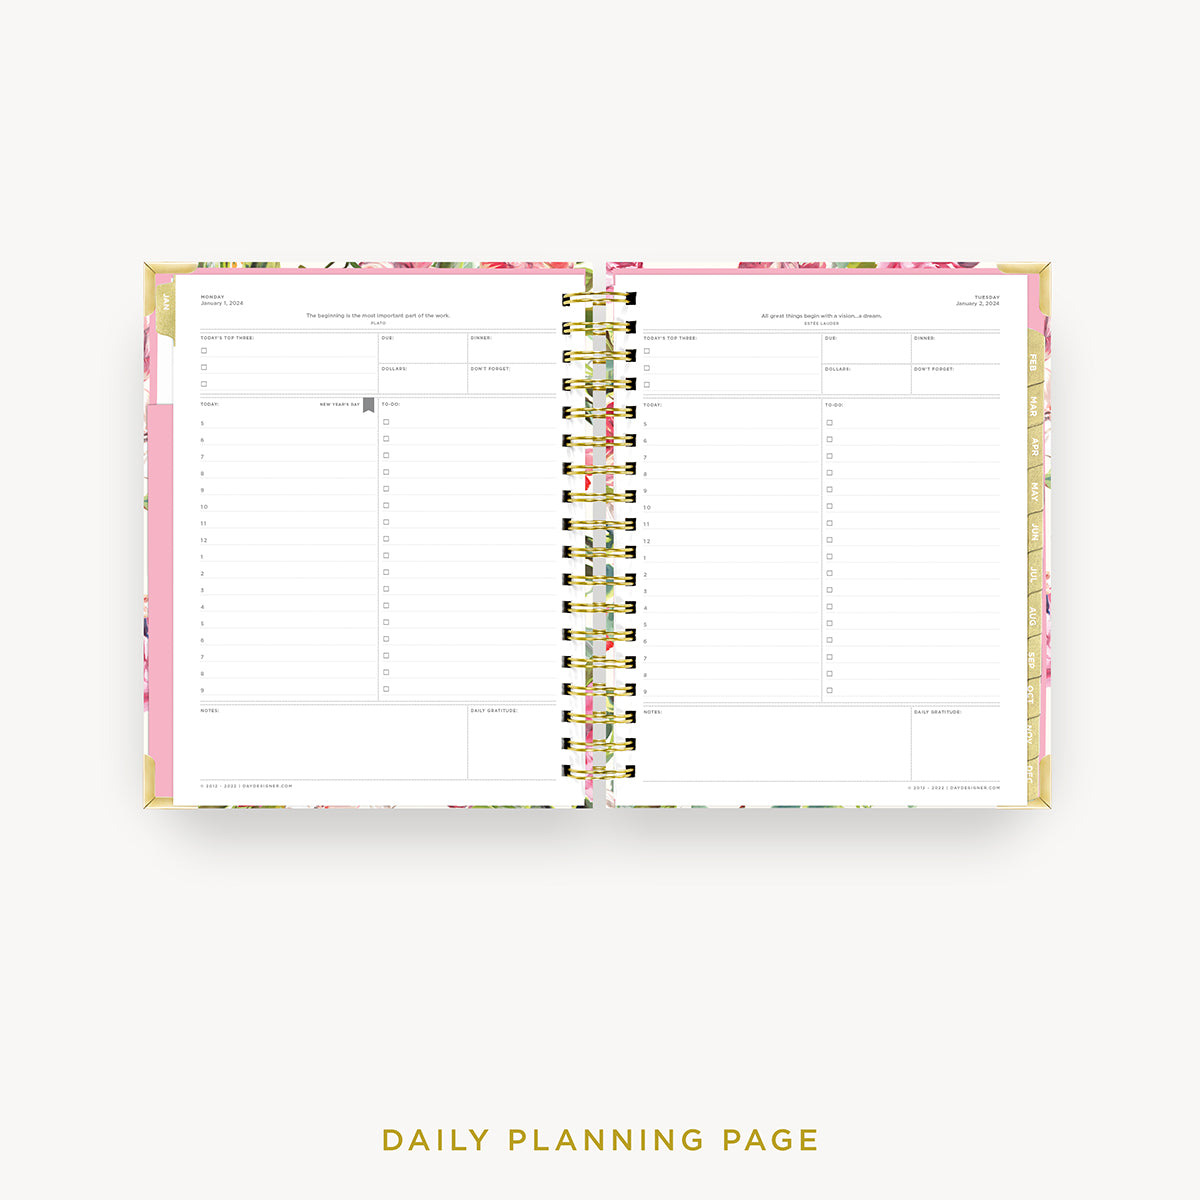 DAY DESIGNER | 2024 Daily Planner - Peony Bookcloth